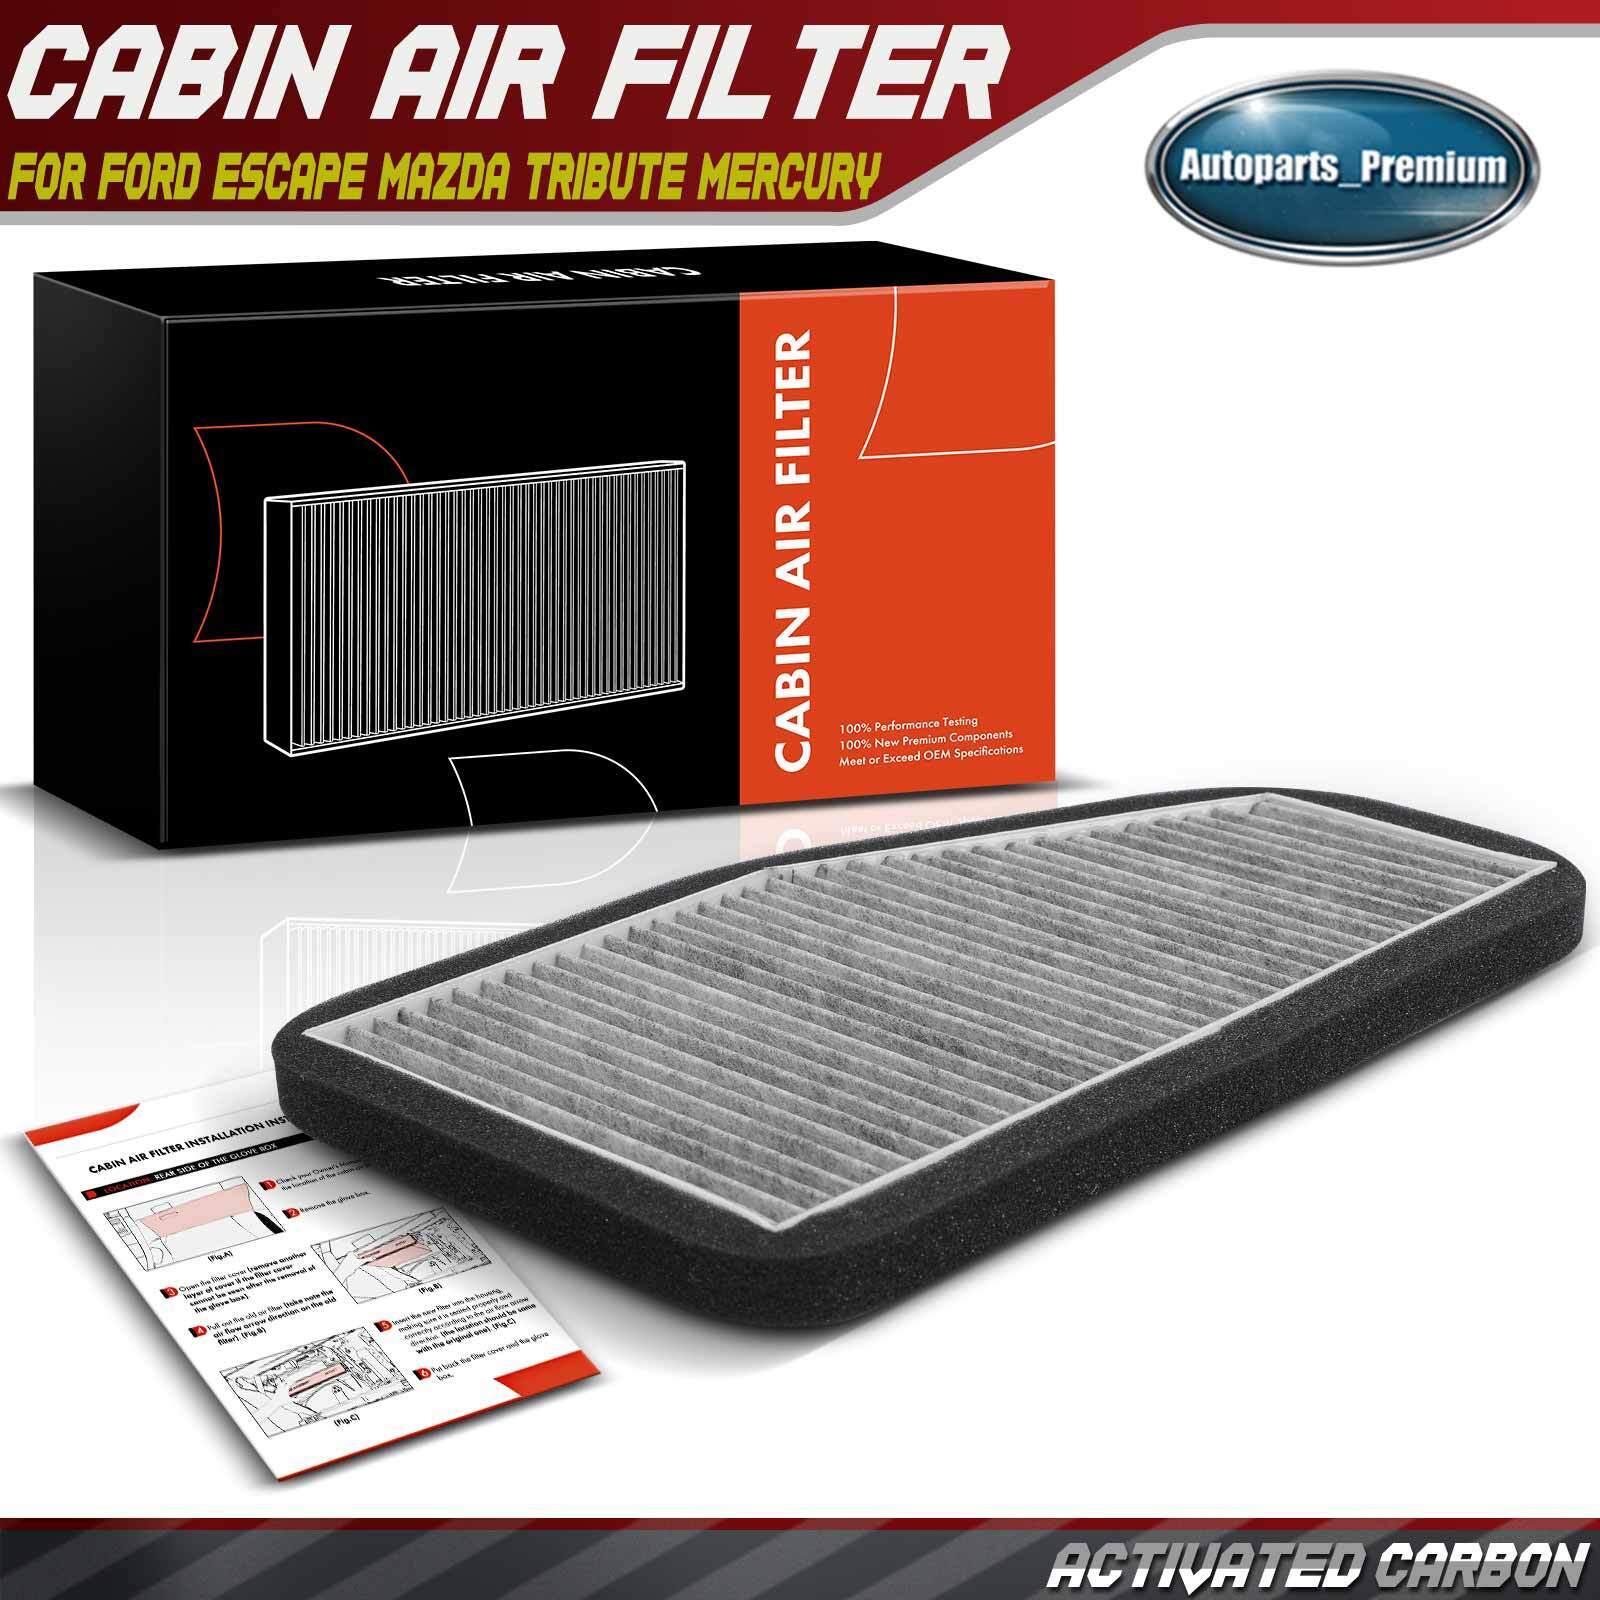 Activated Carbon Cabin Air Filter for Ford Escape 2007-2012 Mazda Tribute 08-11